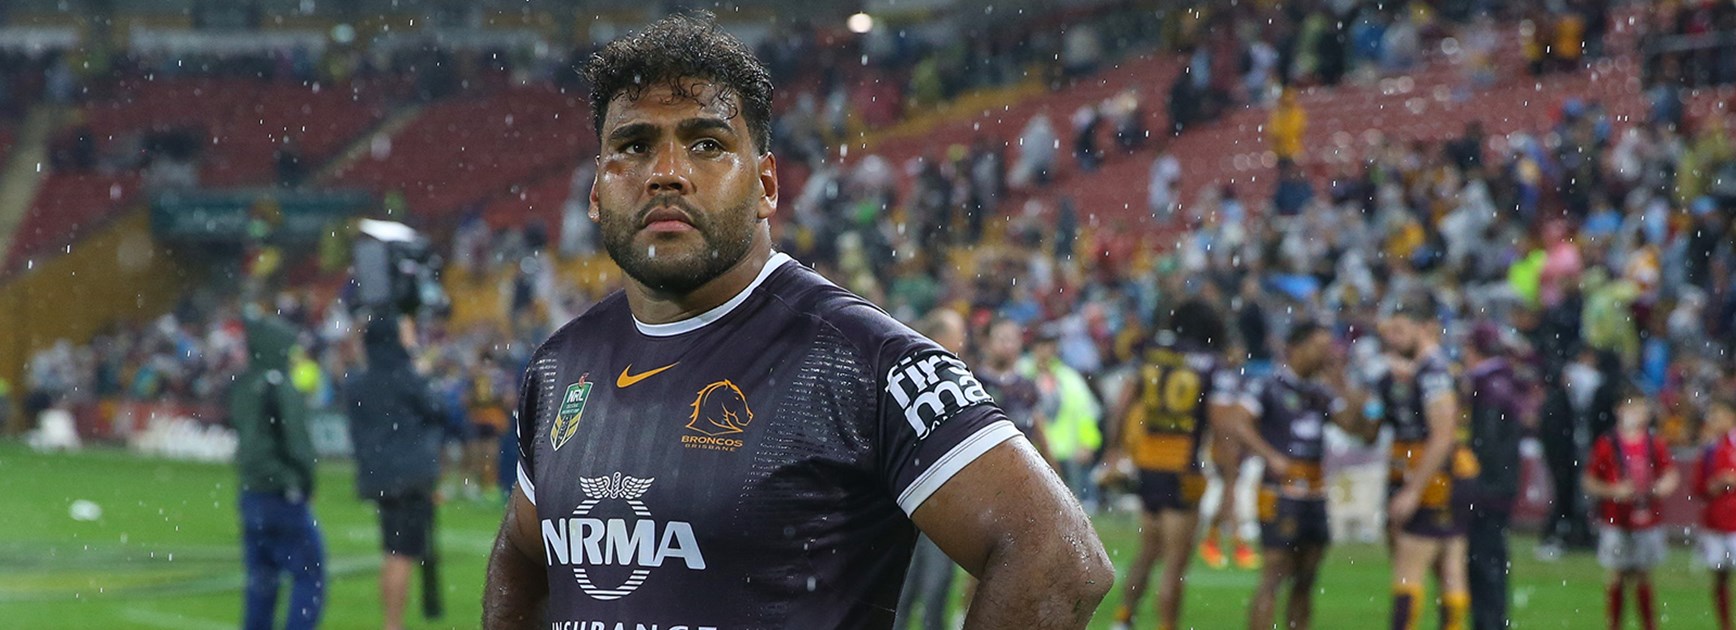 Brisbane forward Sam Thaiday after the Broncos' elimination final win over the Titans.